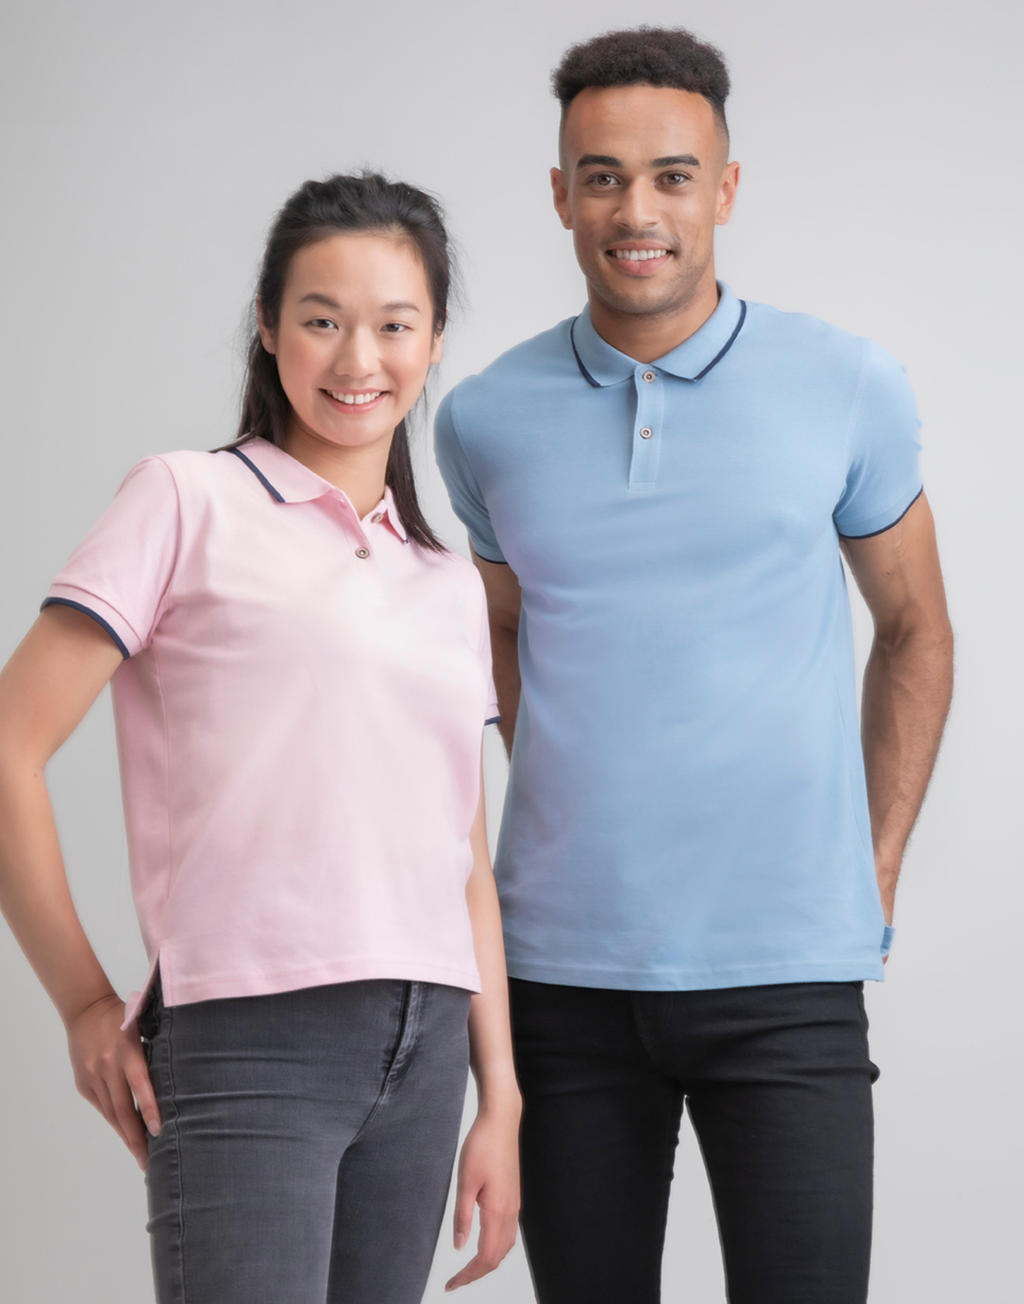  The Women?s Tipped Polo in Farbe White/Navy